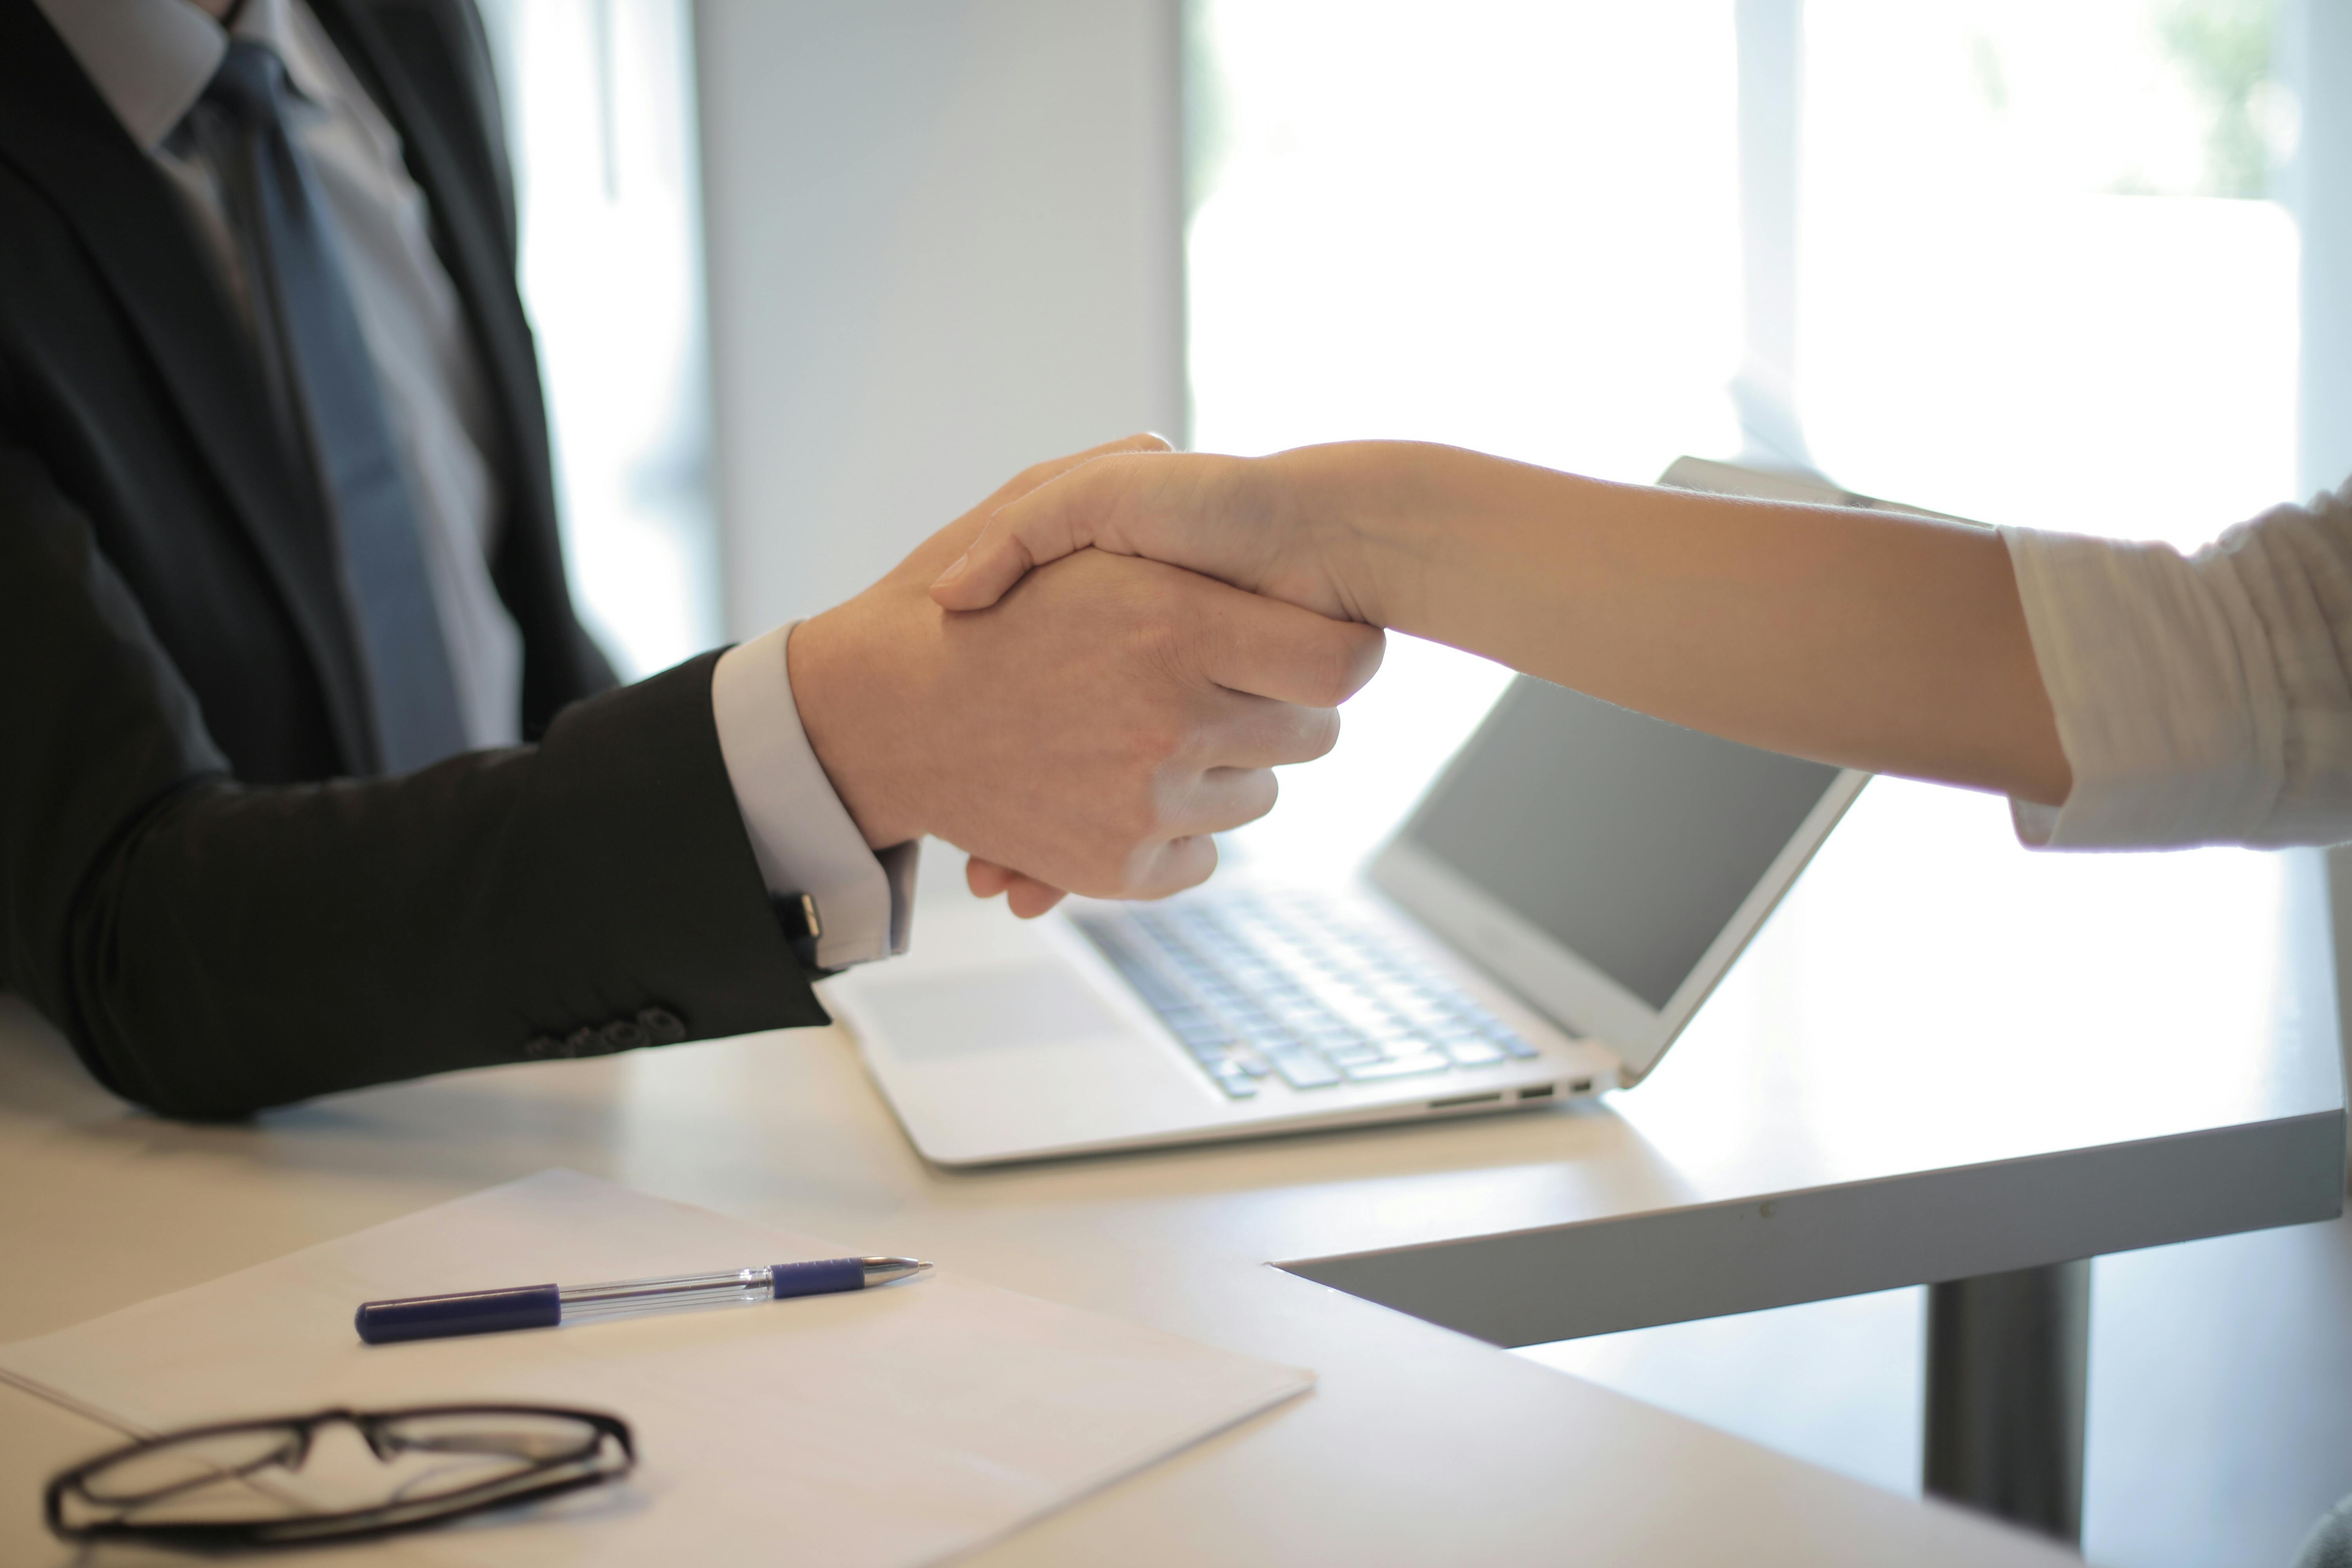 A man and woman shaking hands in an office | Source: Pexels